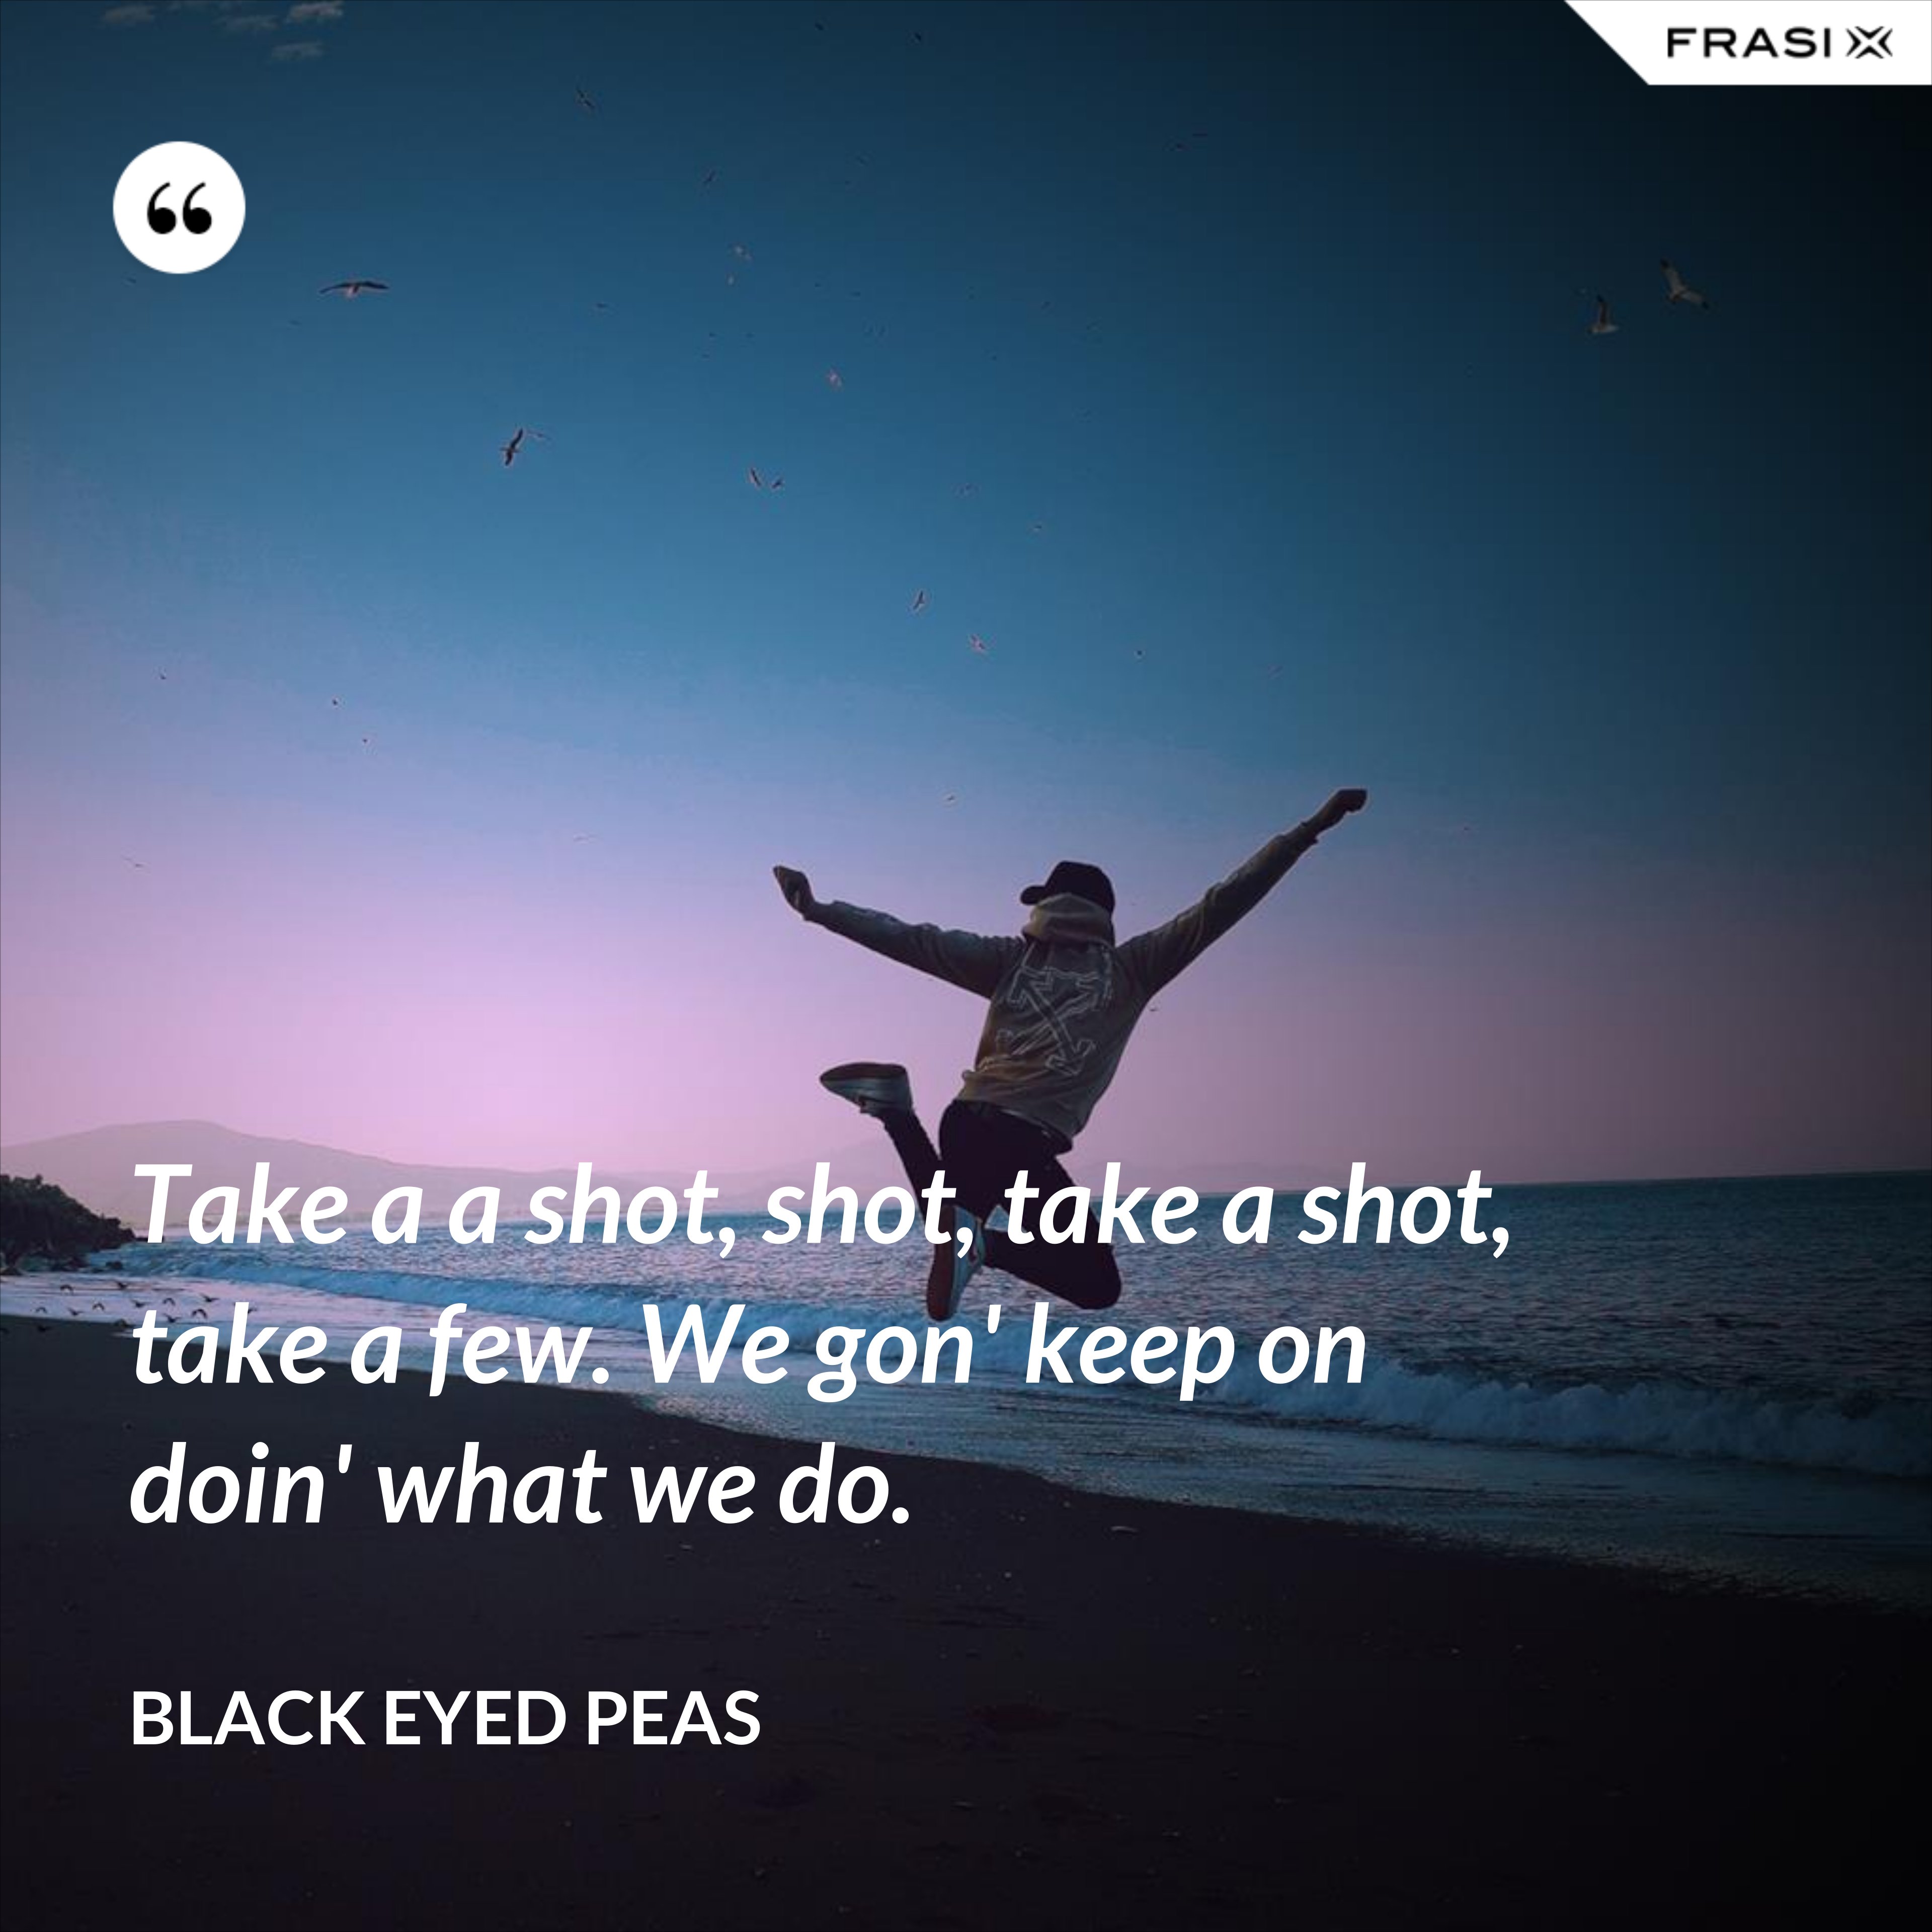 Take a a shot, shot, take a shot, take a few. We gon' keep on doin' what we do. - Black Eyed Peas